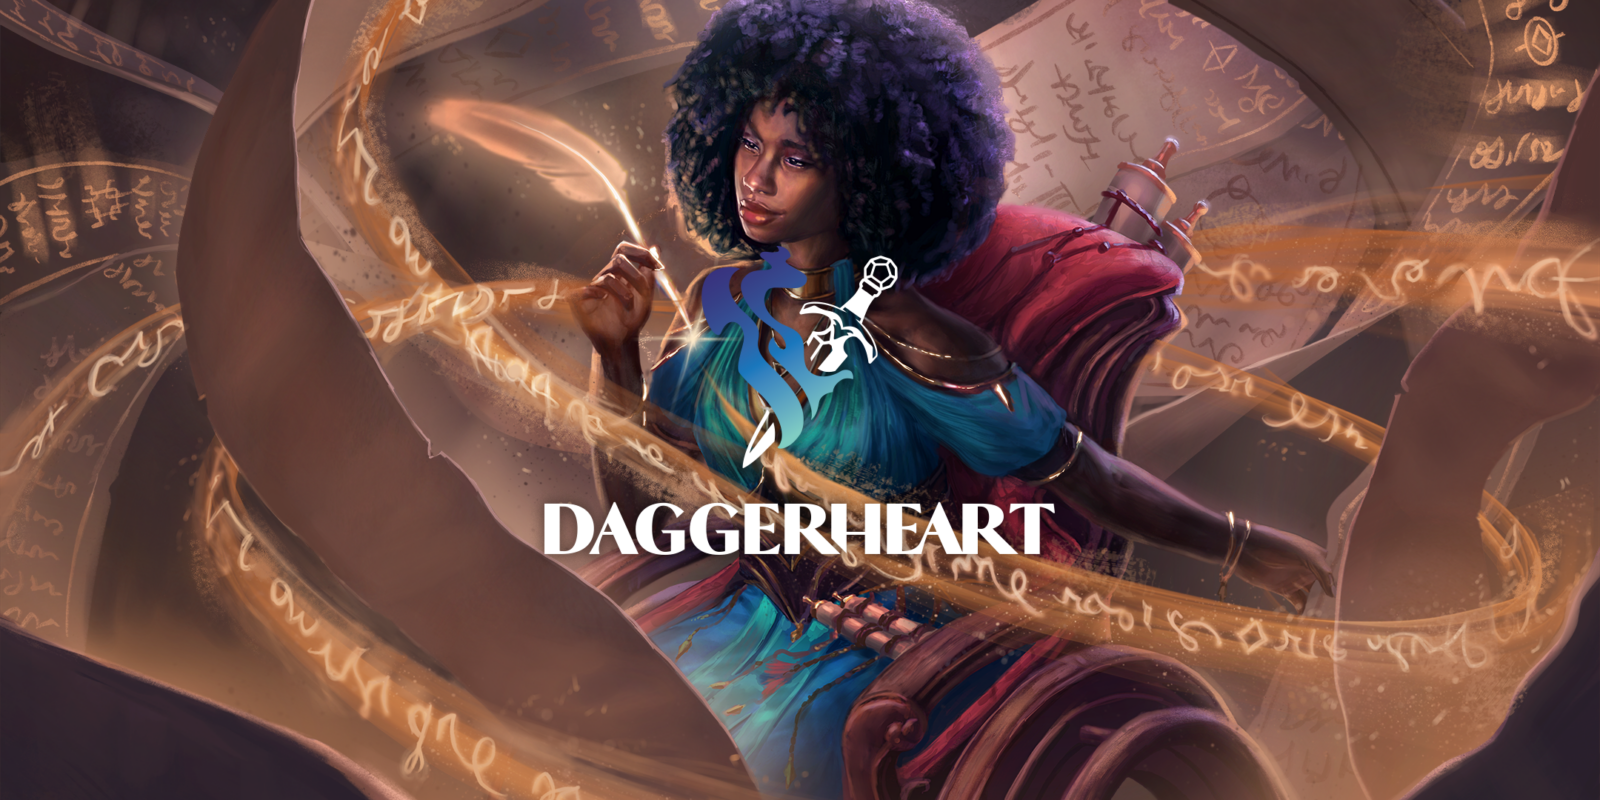 Spellbinding artwork by Nikki Dawes (@nikkidawesdraws) depicts a magic user weaving golden threads together with an enchanted, glowing quill amidst a swirl of handwritten pages and illuminated floating text beneath the stylized dagger and flame logo of Daggerheart